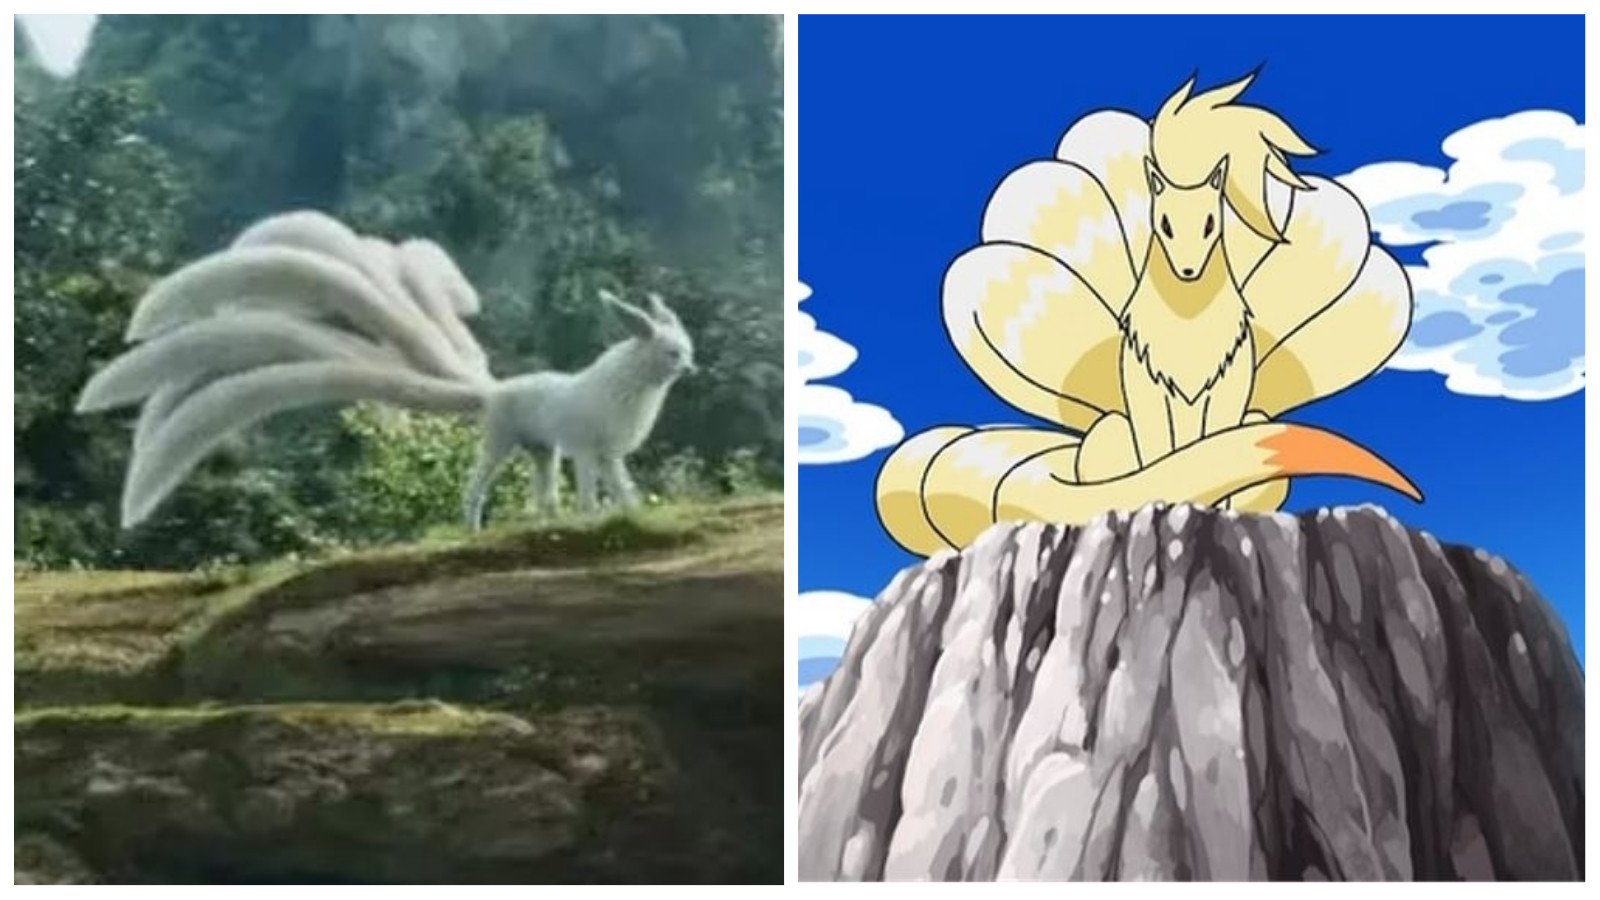 Notice something similar? Eagle-eyed viewers noticed that the nine-tailed foxes found in the new Marvel film share a striking resemblance to a Pokémon monster. Photo: Marvel Studios, TXN